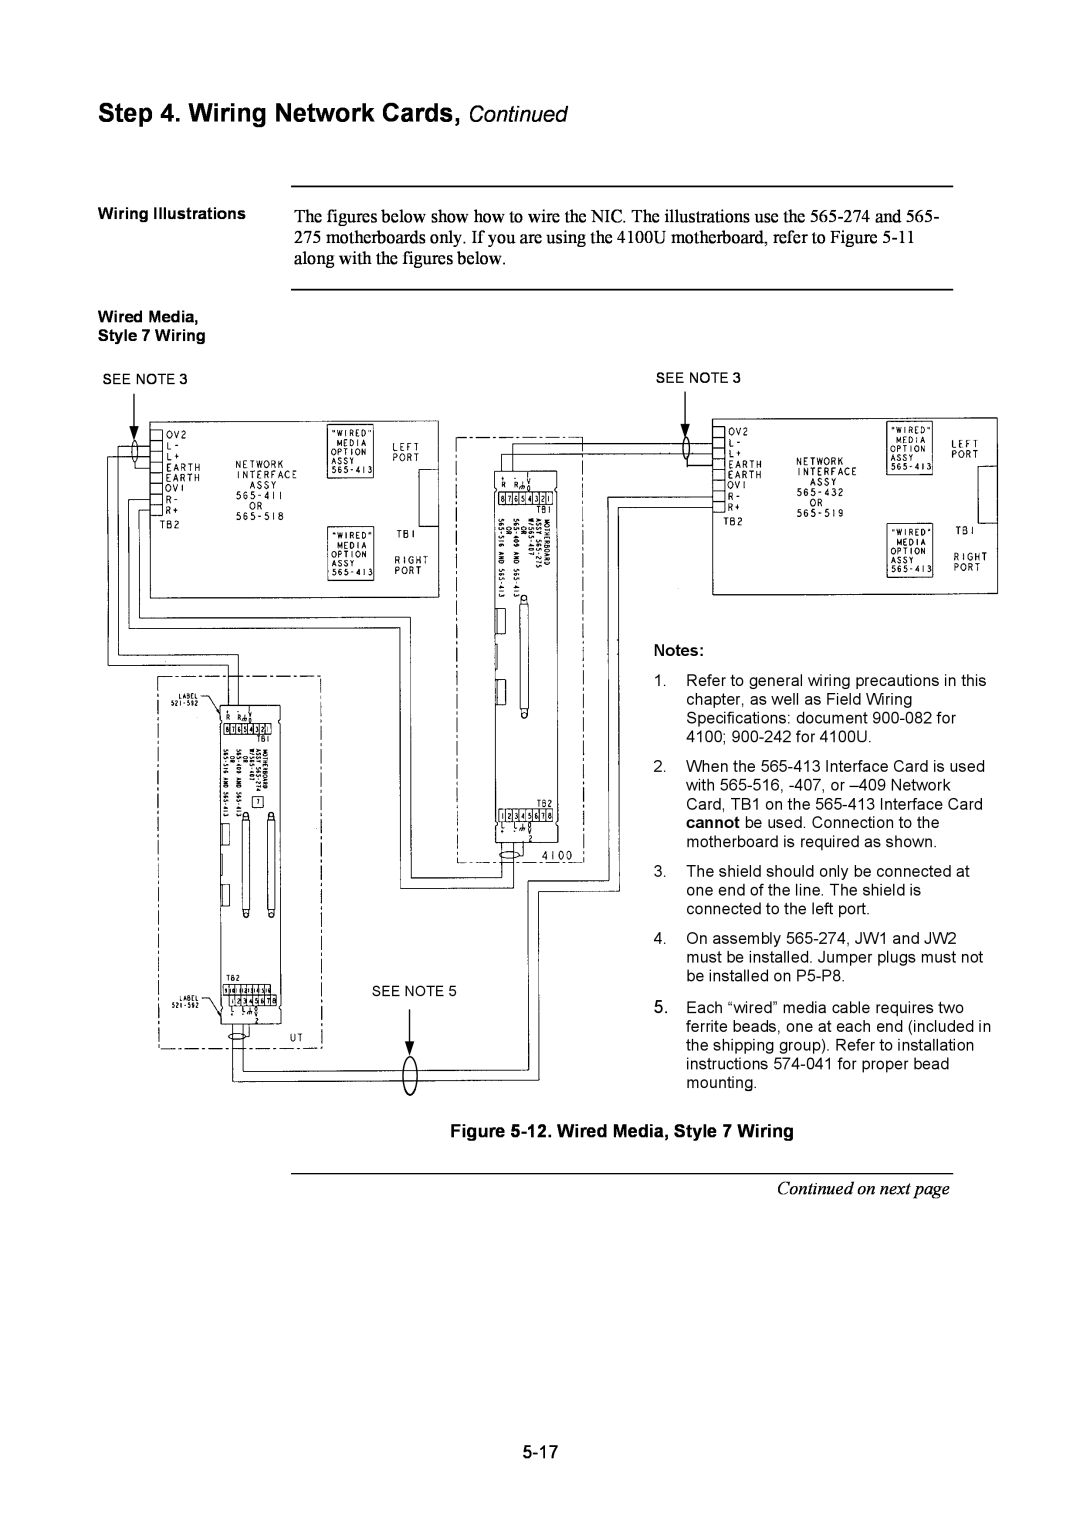 Tyco 4100U Wiring Network Cards, Continued, 12.Wired Media, Style 7 Wiring, Continued on next page, Notes 